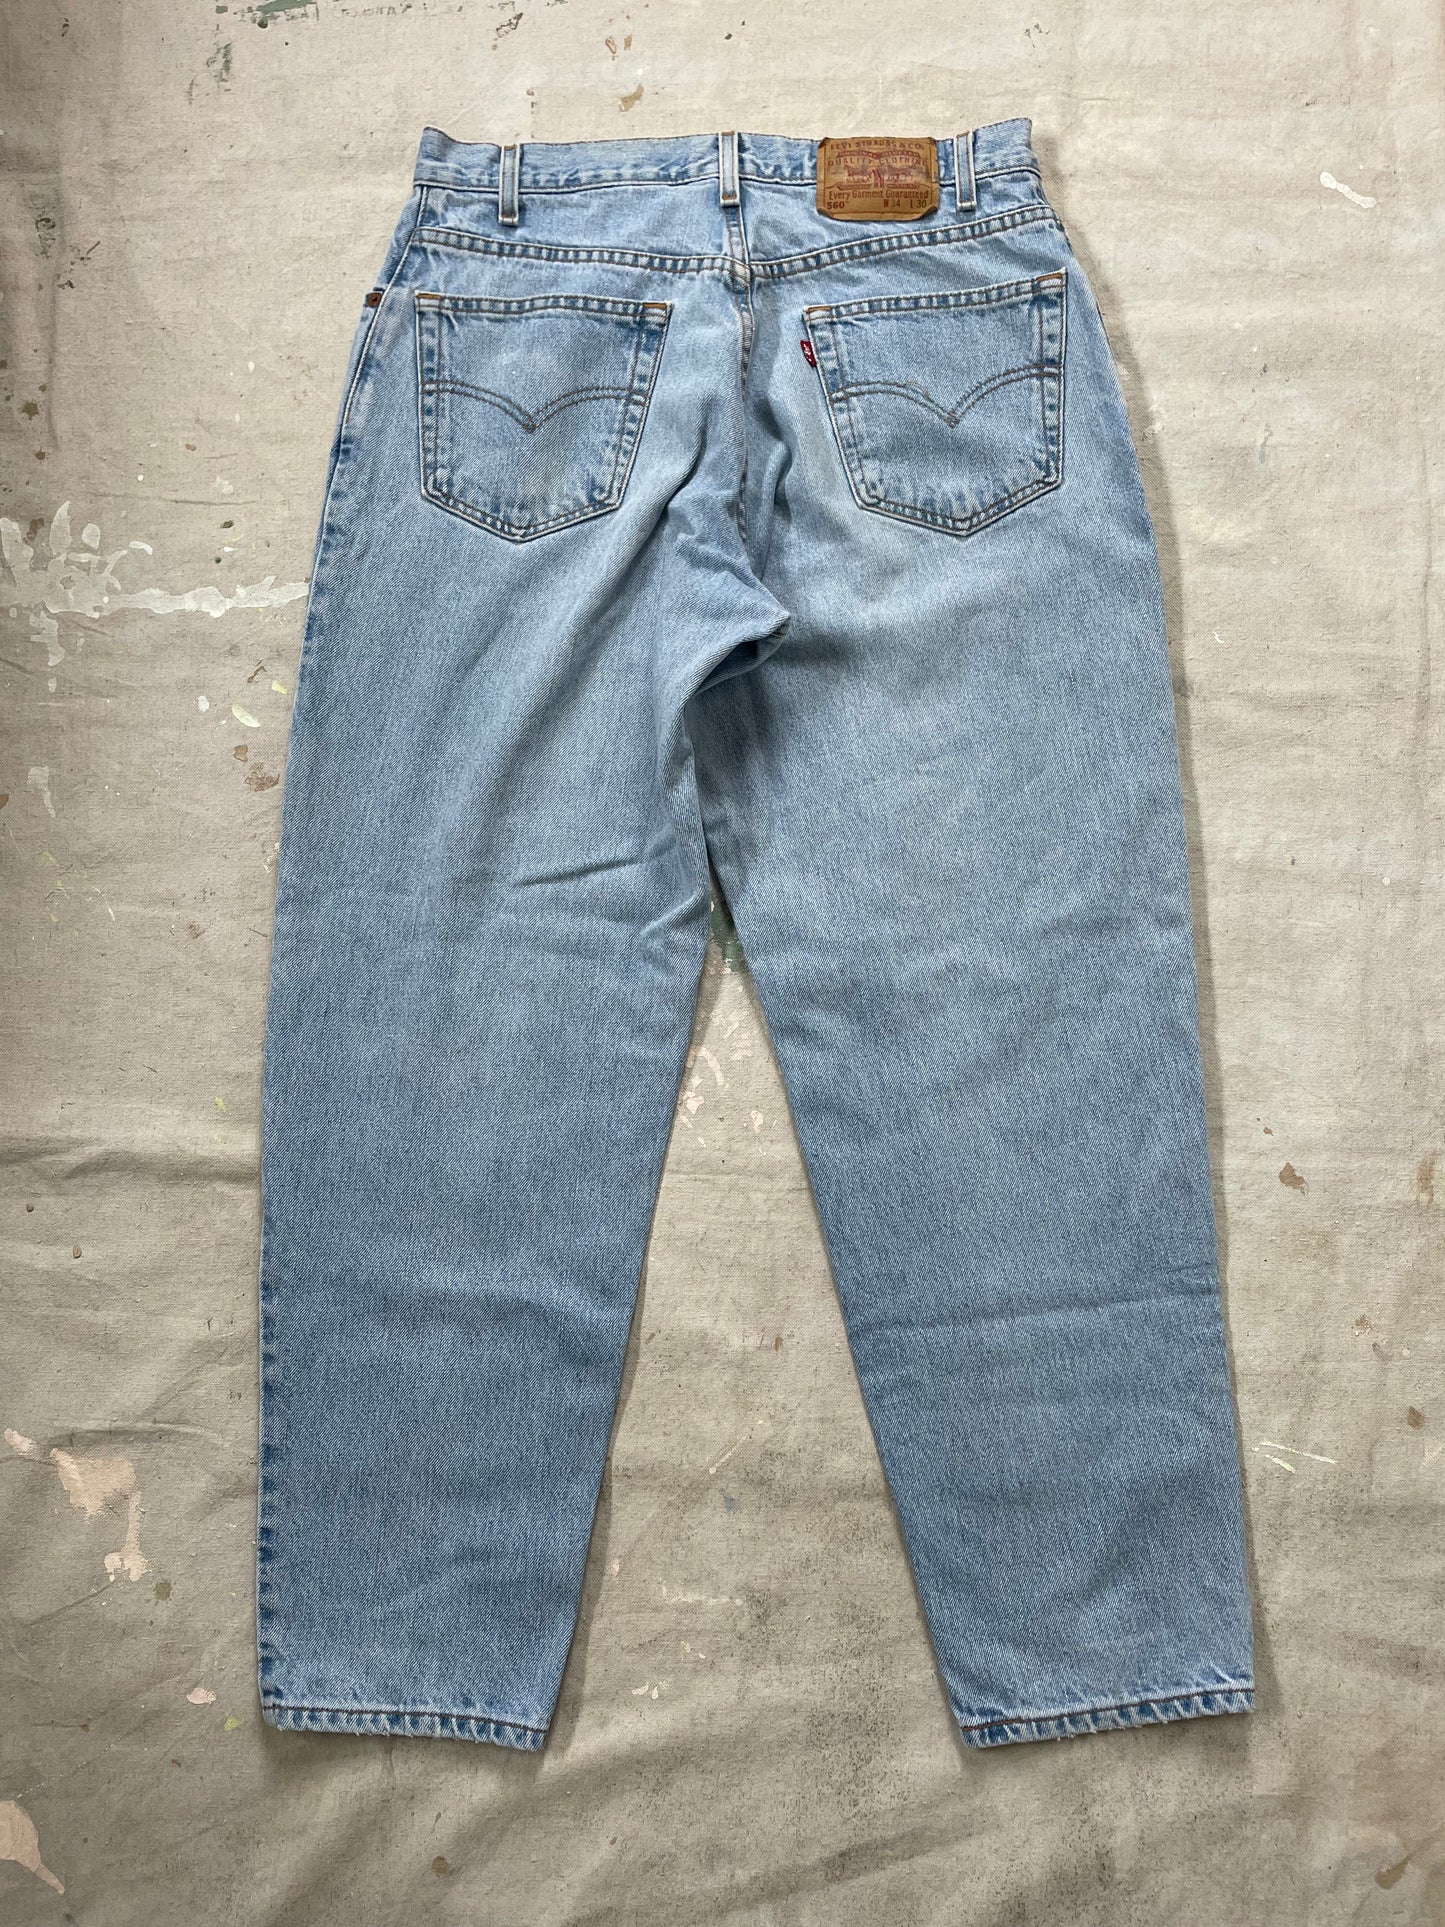 90s Levi’s 560 Tapered Jeans